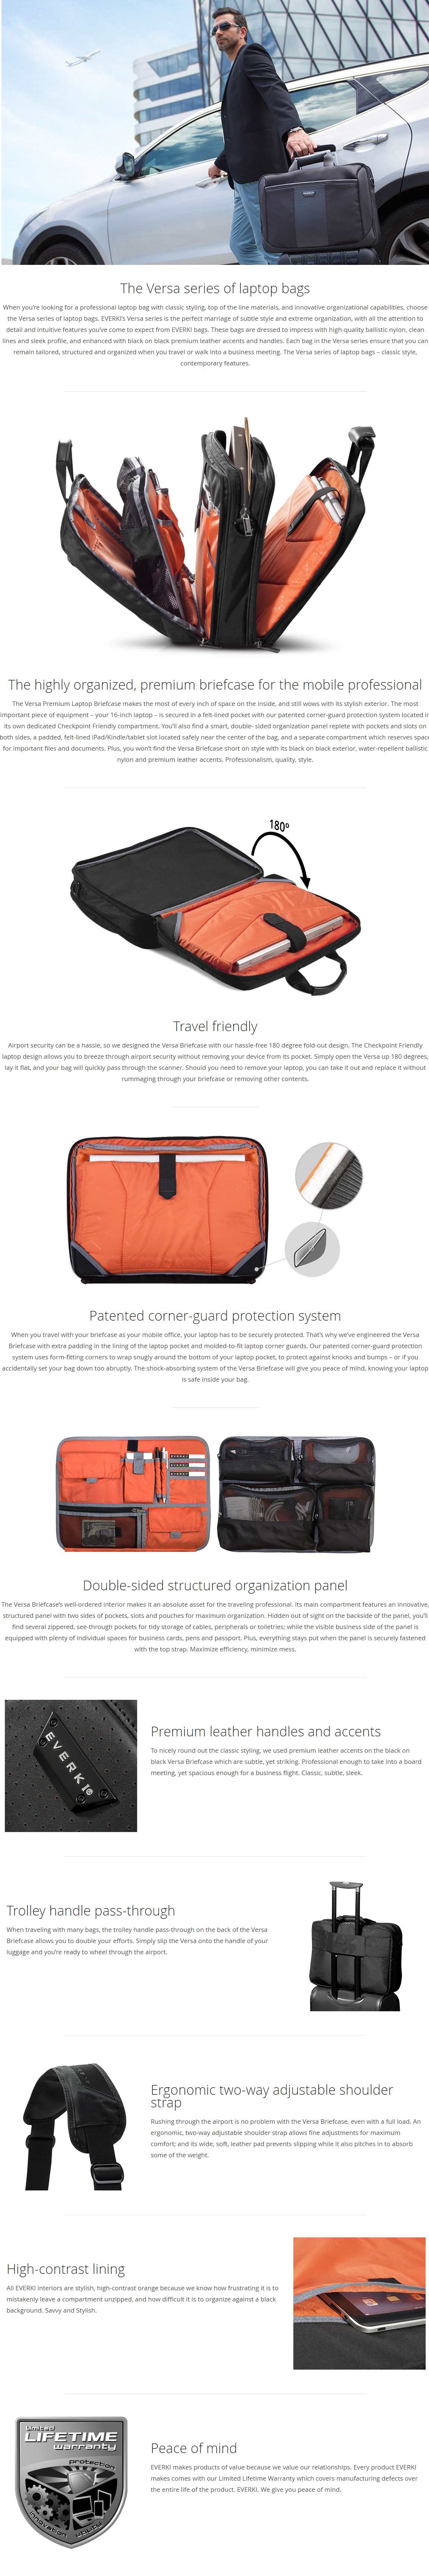 A large marketing image providing additional information about the product Everki 16" Versa Checkpoint Friendly Briefcase - Additional alt info not provided